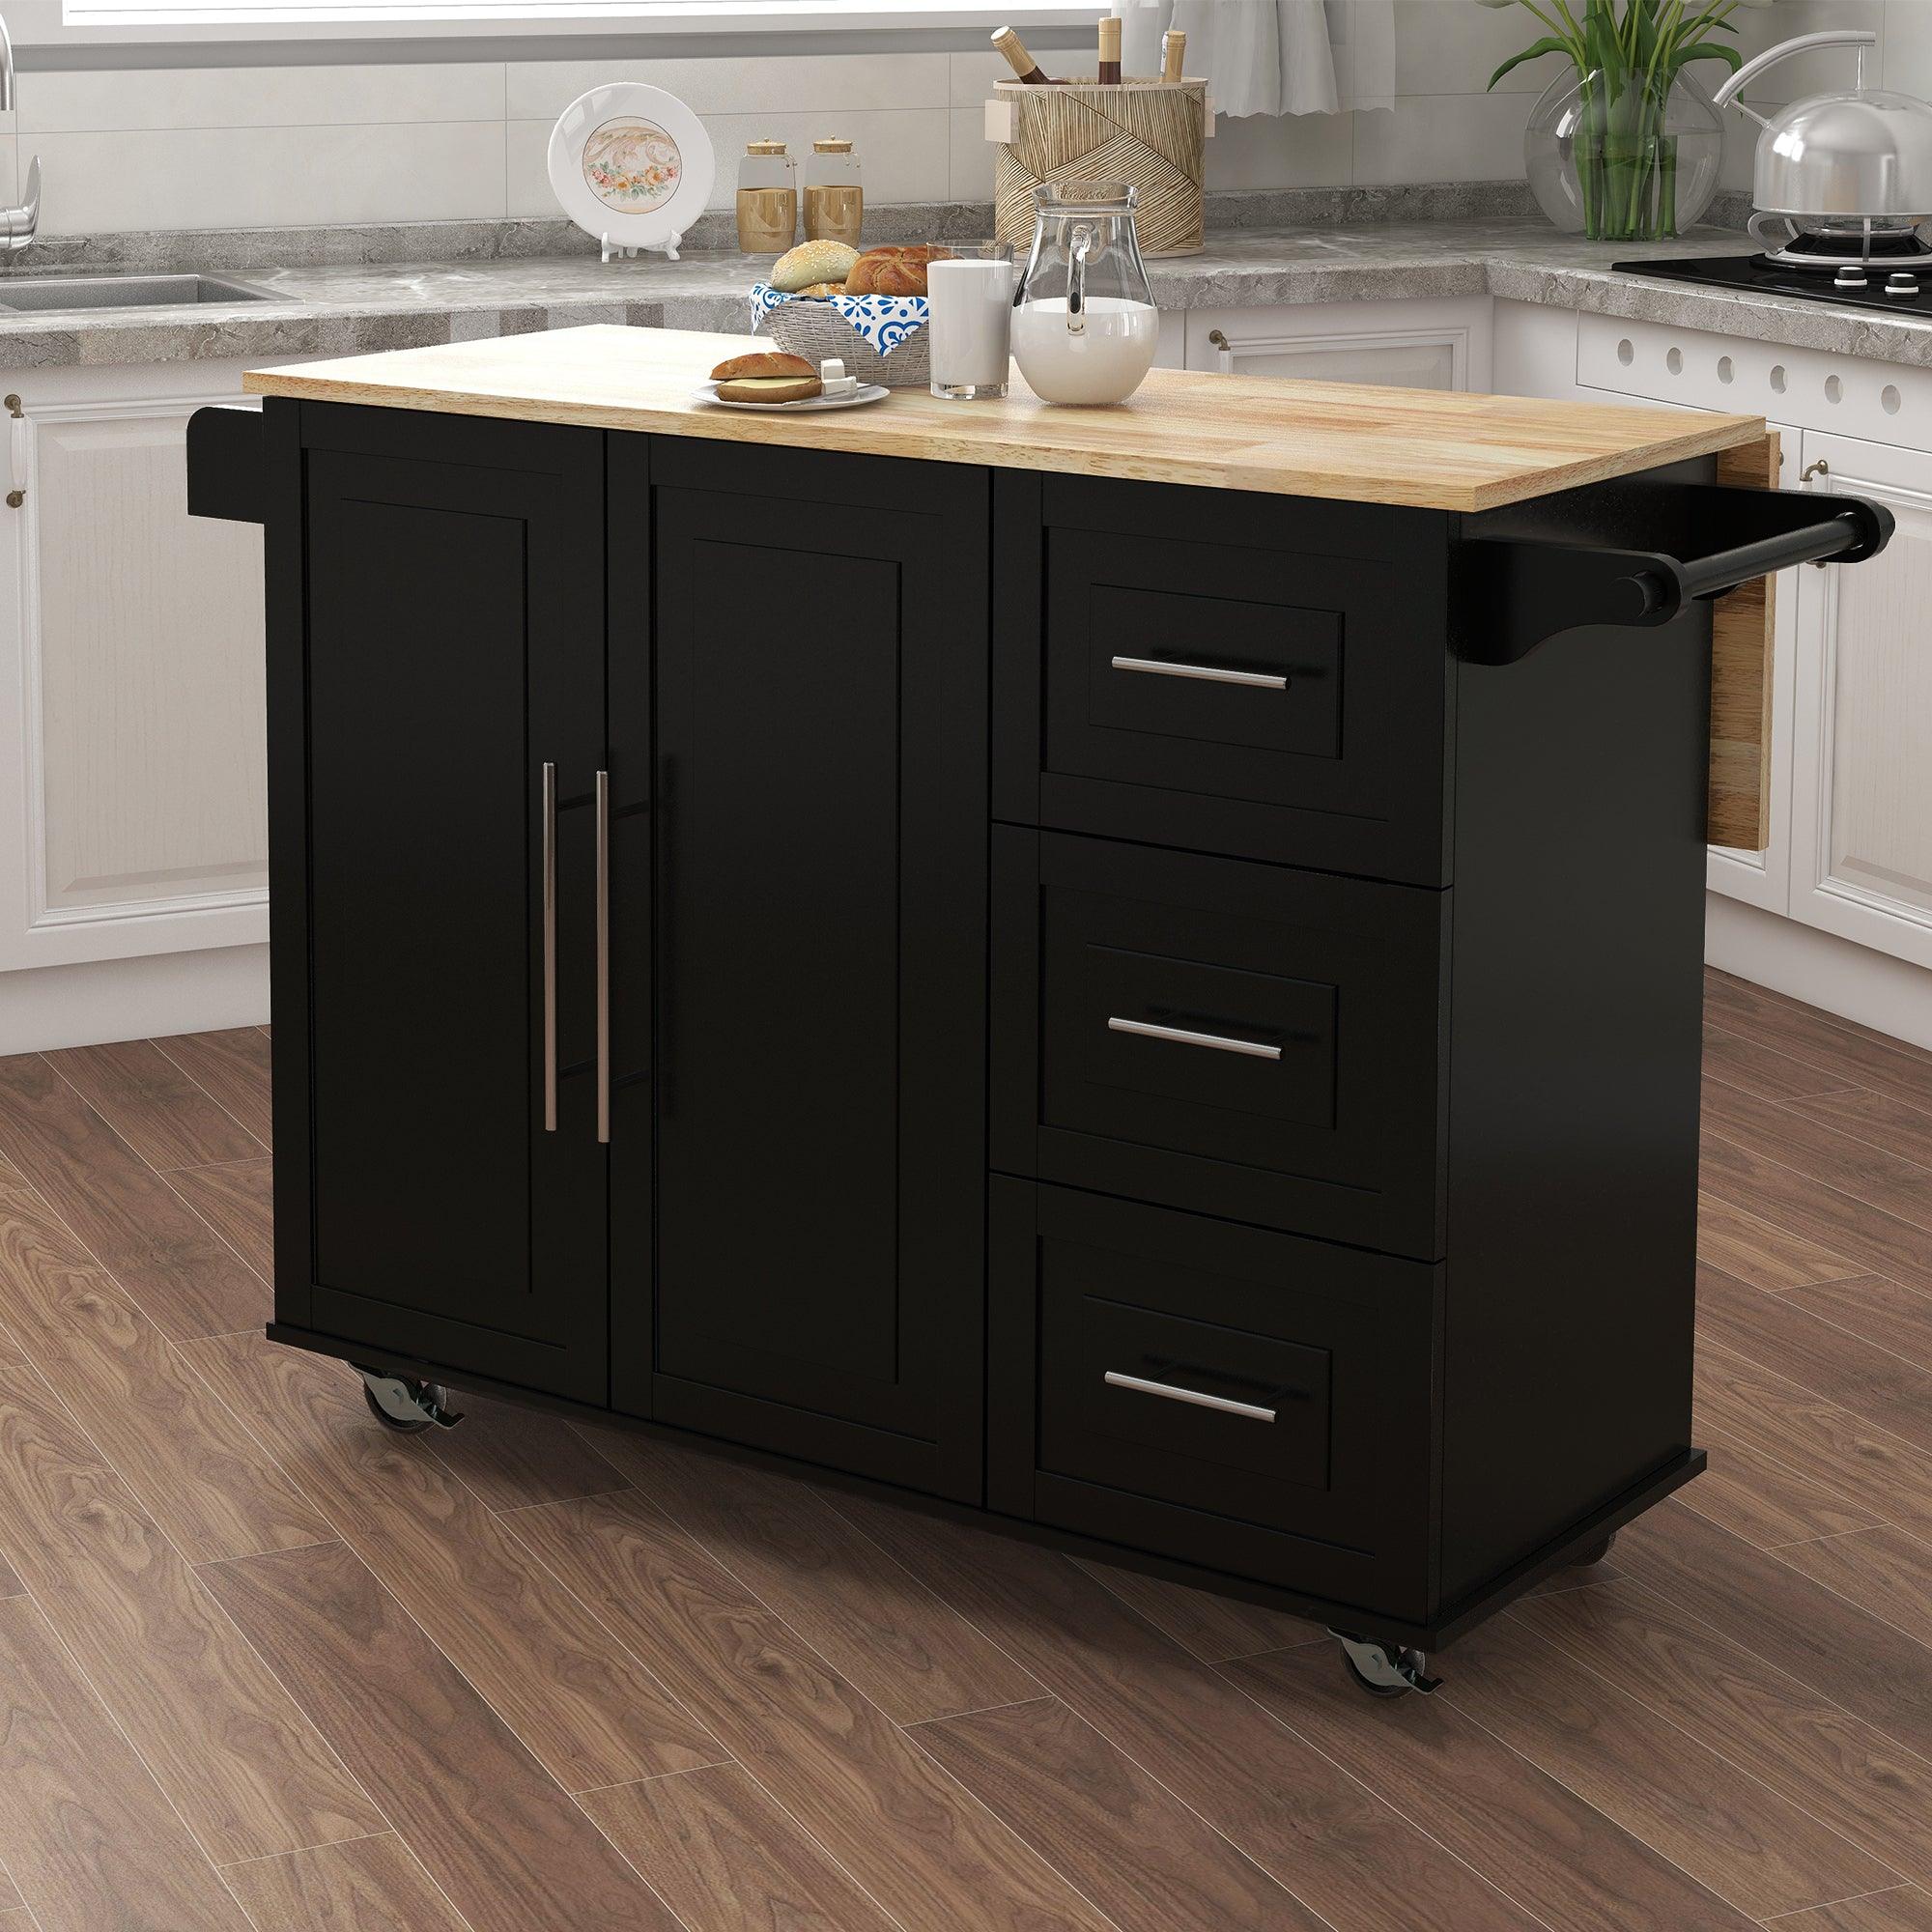 🆓🚛 Kitchen Island With Spice Rack, Towel Rack & Extensible Solid Wood Table Top-Black